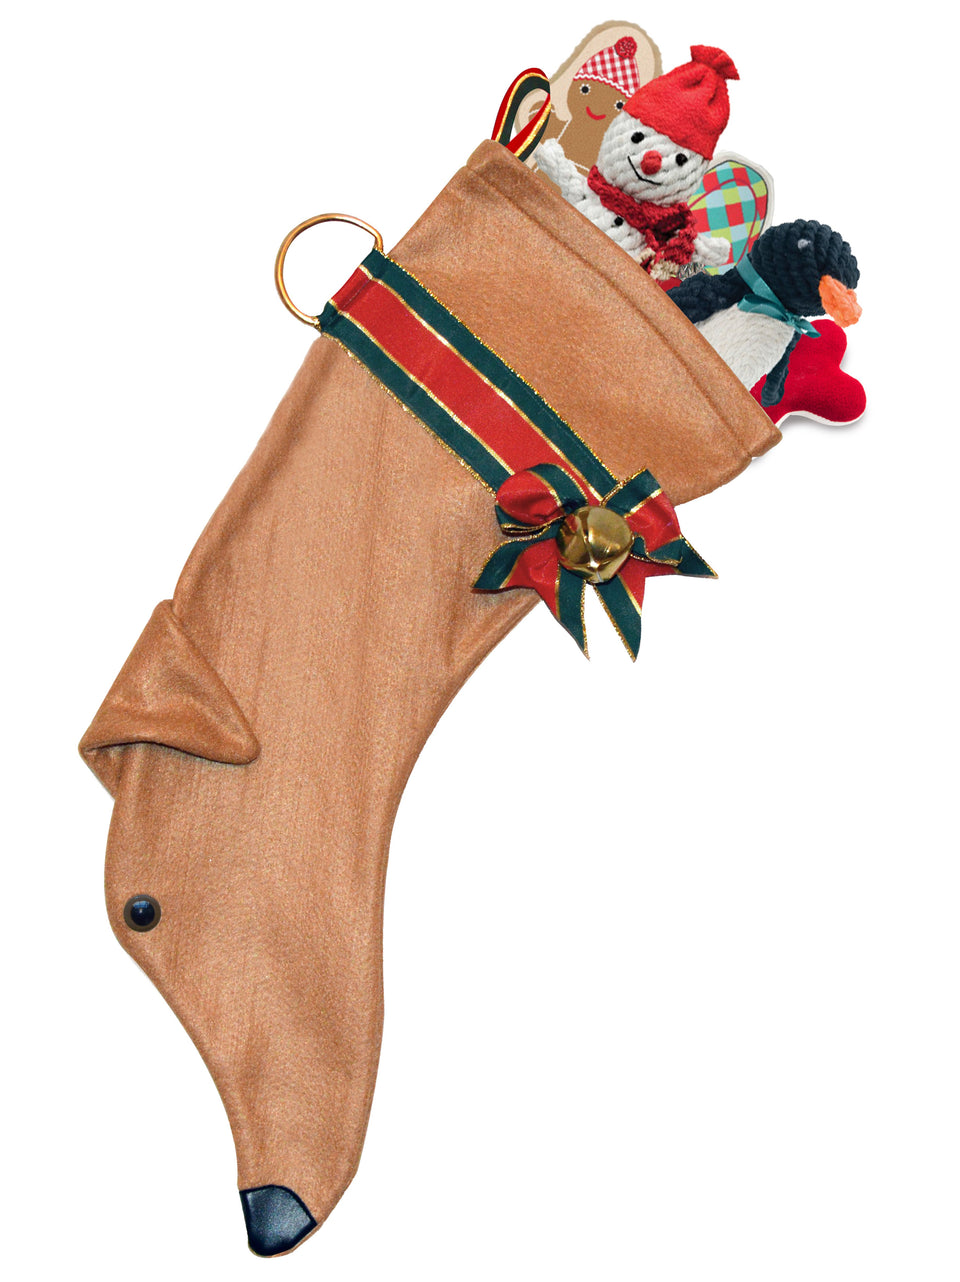 This Greyhound dog shaped Christmas stocking is perfect for stuffing toys and treats into to spoil your fur baby for Christmas, or whatever holiday you celebrate! 